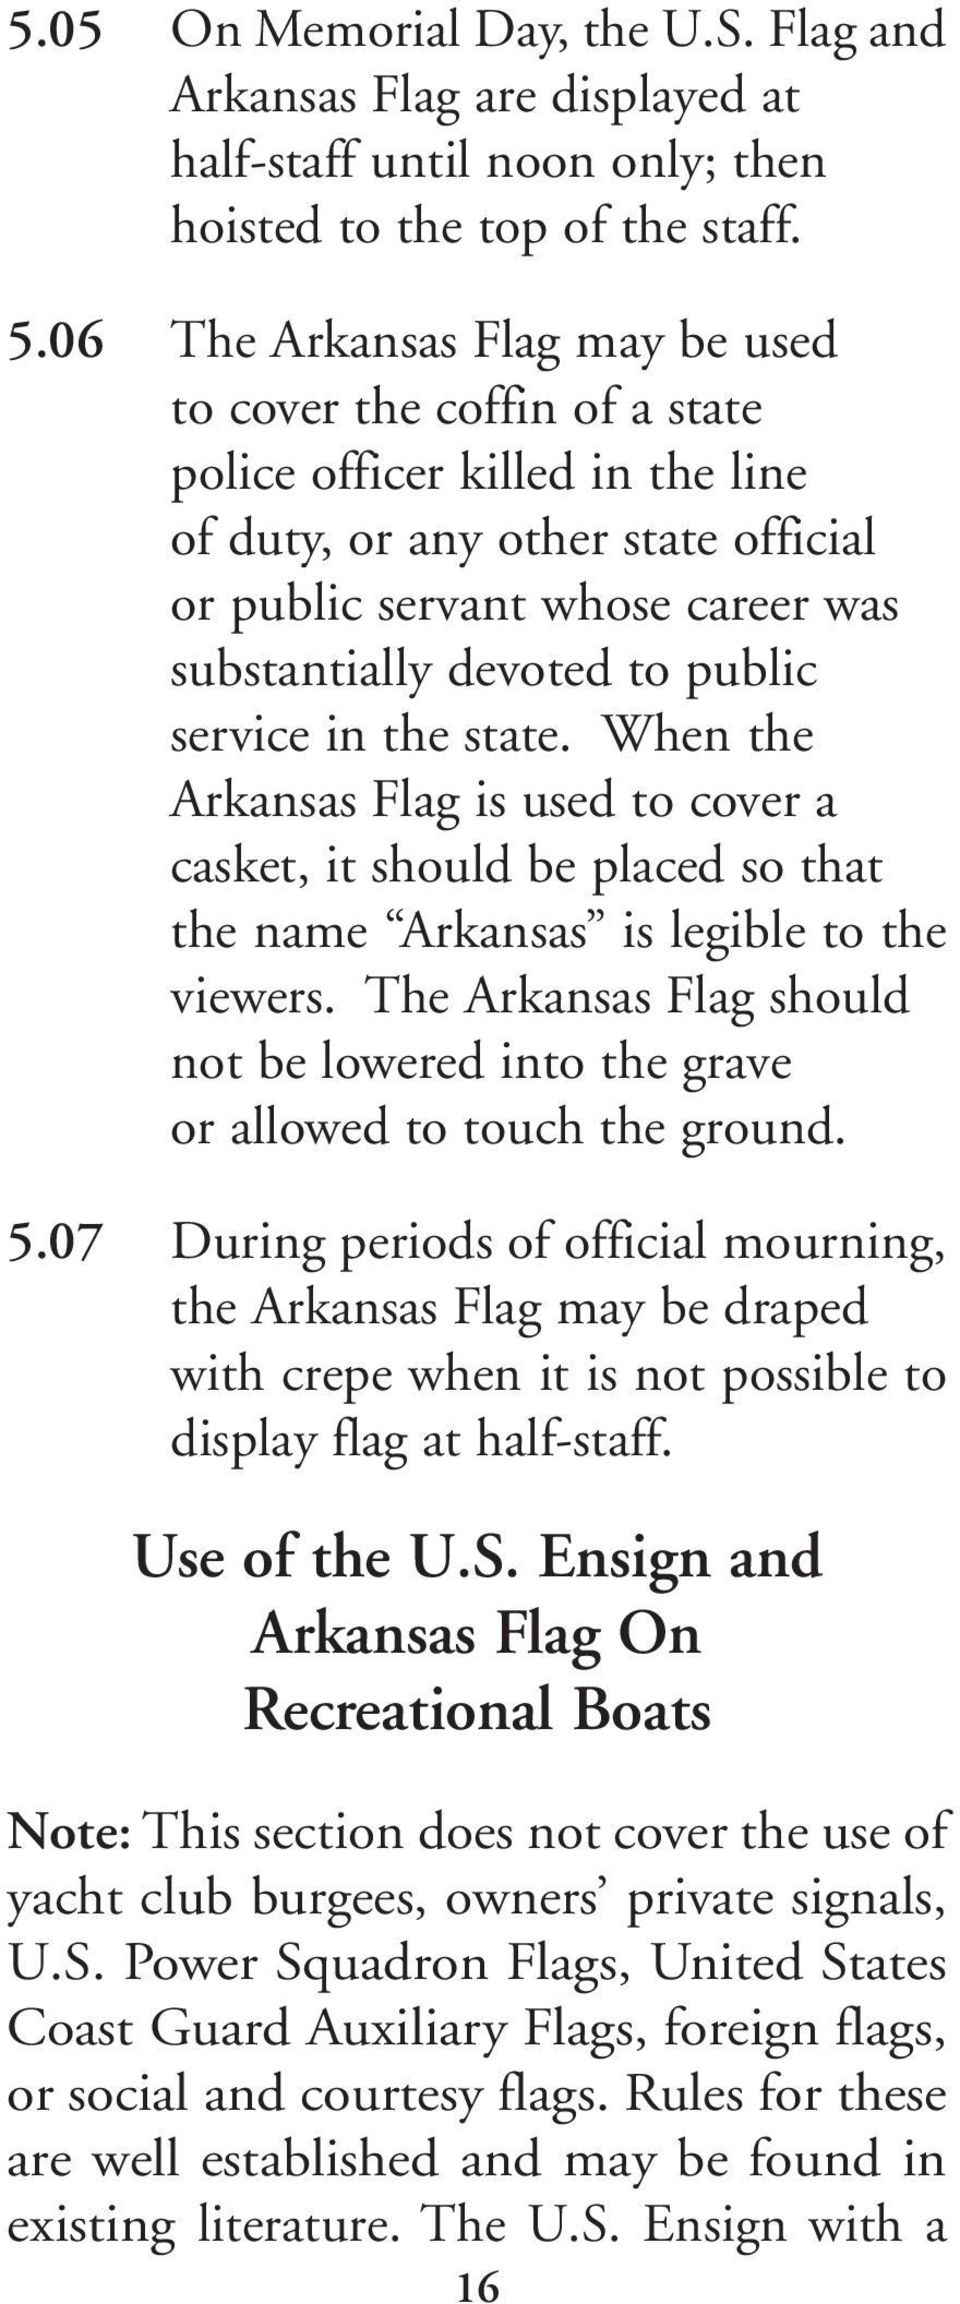 public service in the state. When the Arkansas Flag is used to cover a casket, it should be placed so that the name Arkansas is legible to the viewers.